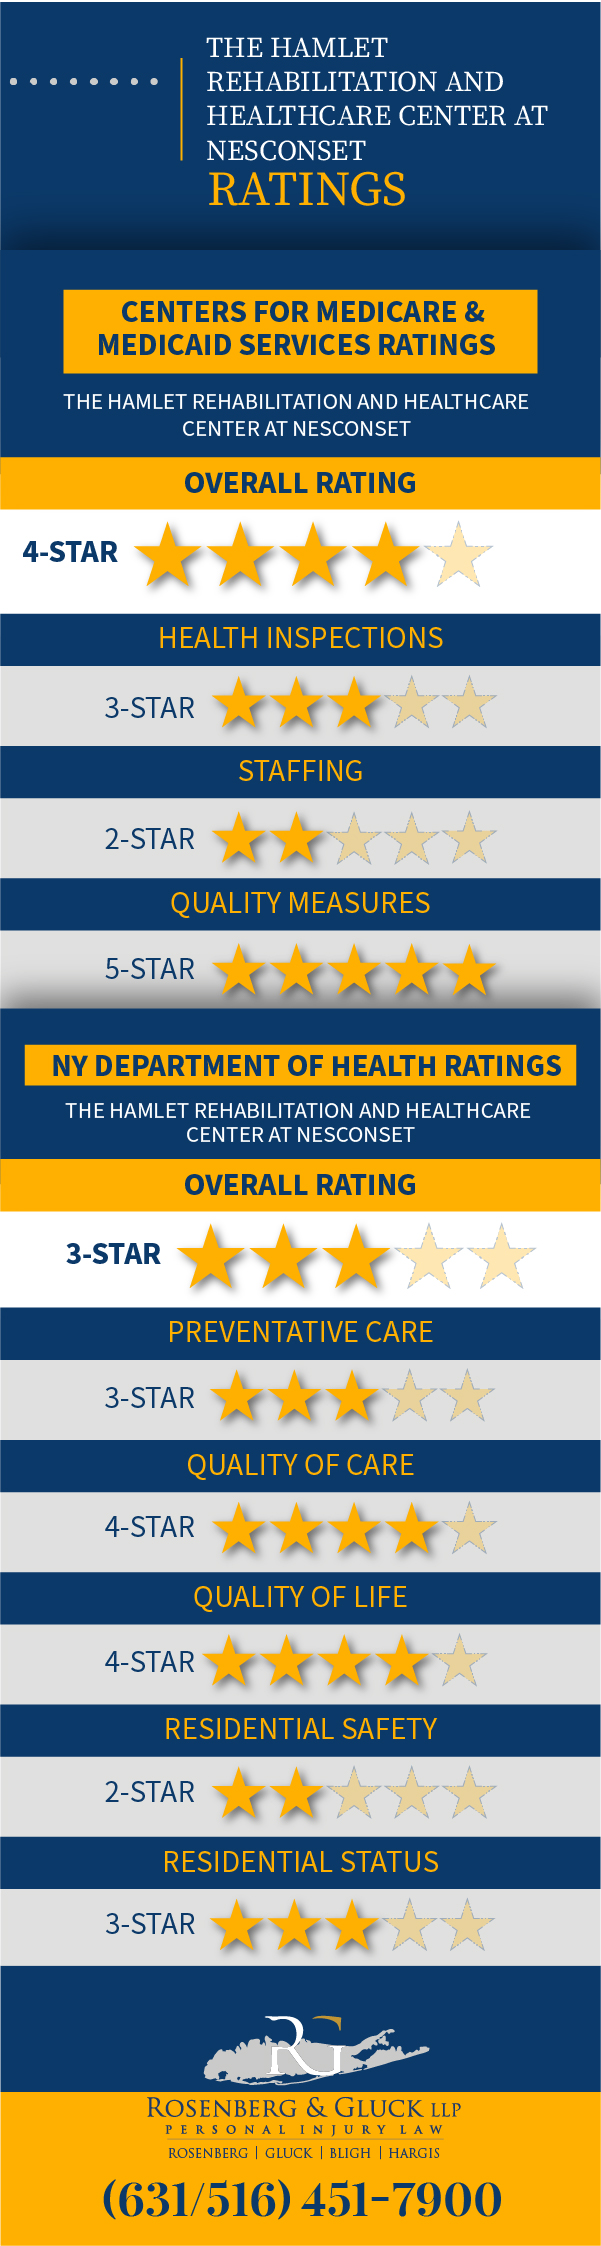 The Hamlet Rehabilitation and Healthcare Center at Nesconset, Violations and Ratings Infographic